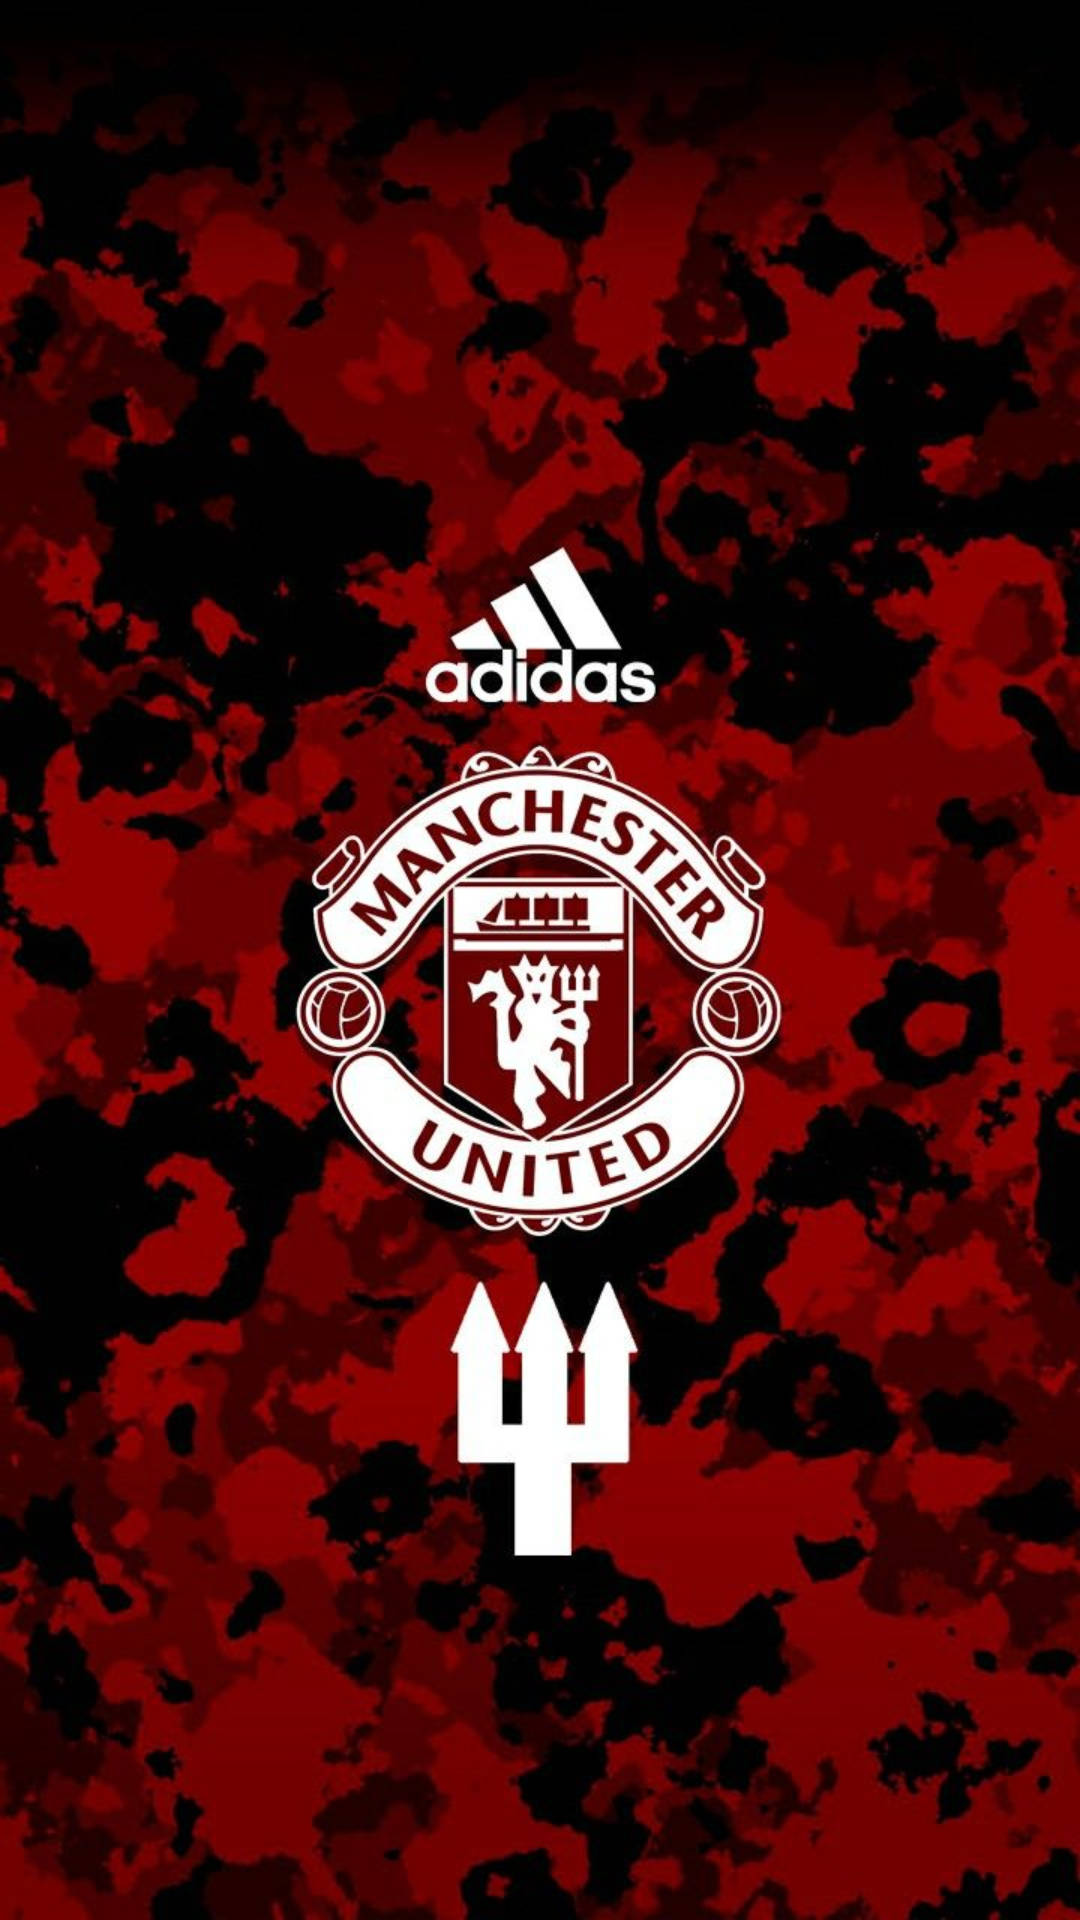 Download Logo Of Adidas On Manchester United Mobile Wallpaper | Wallpapers .com